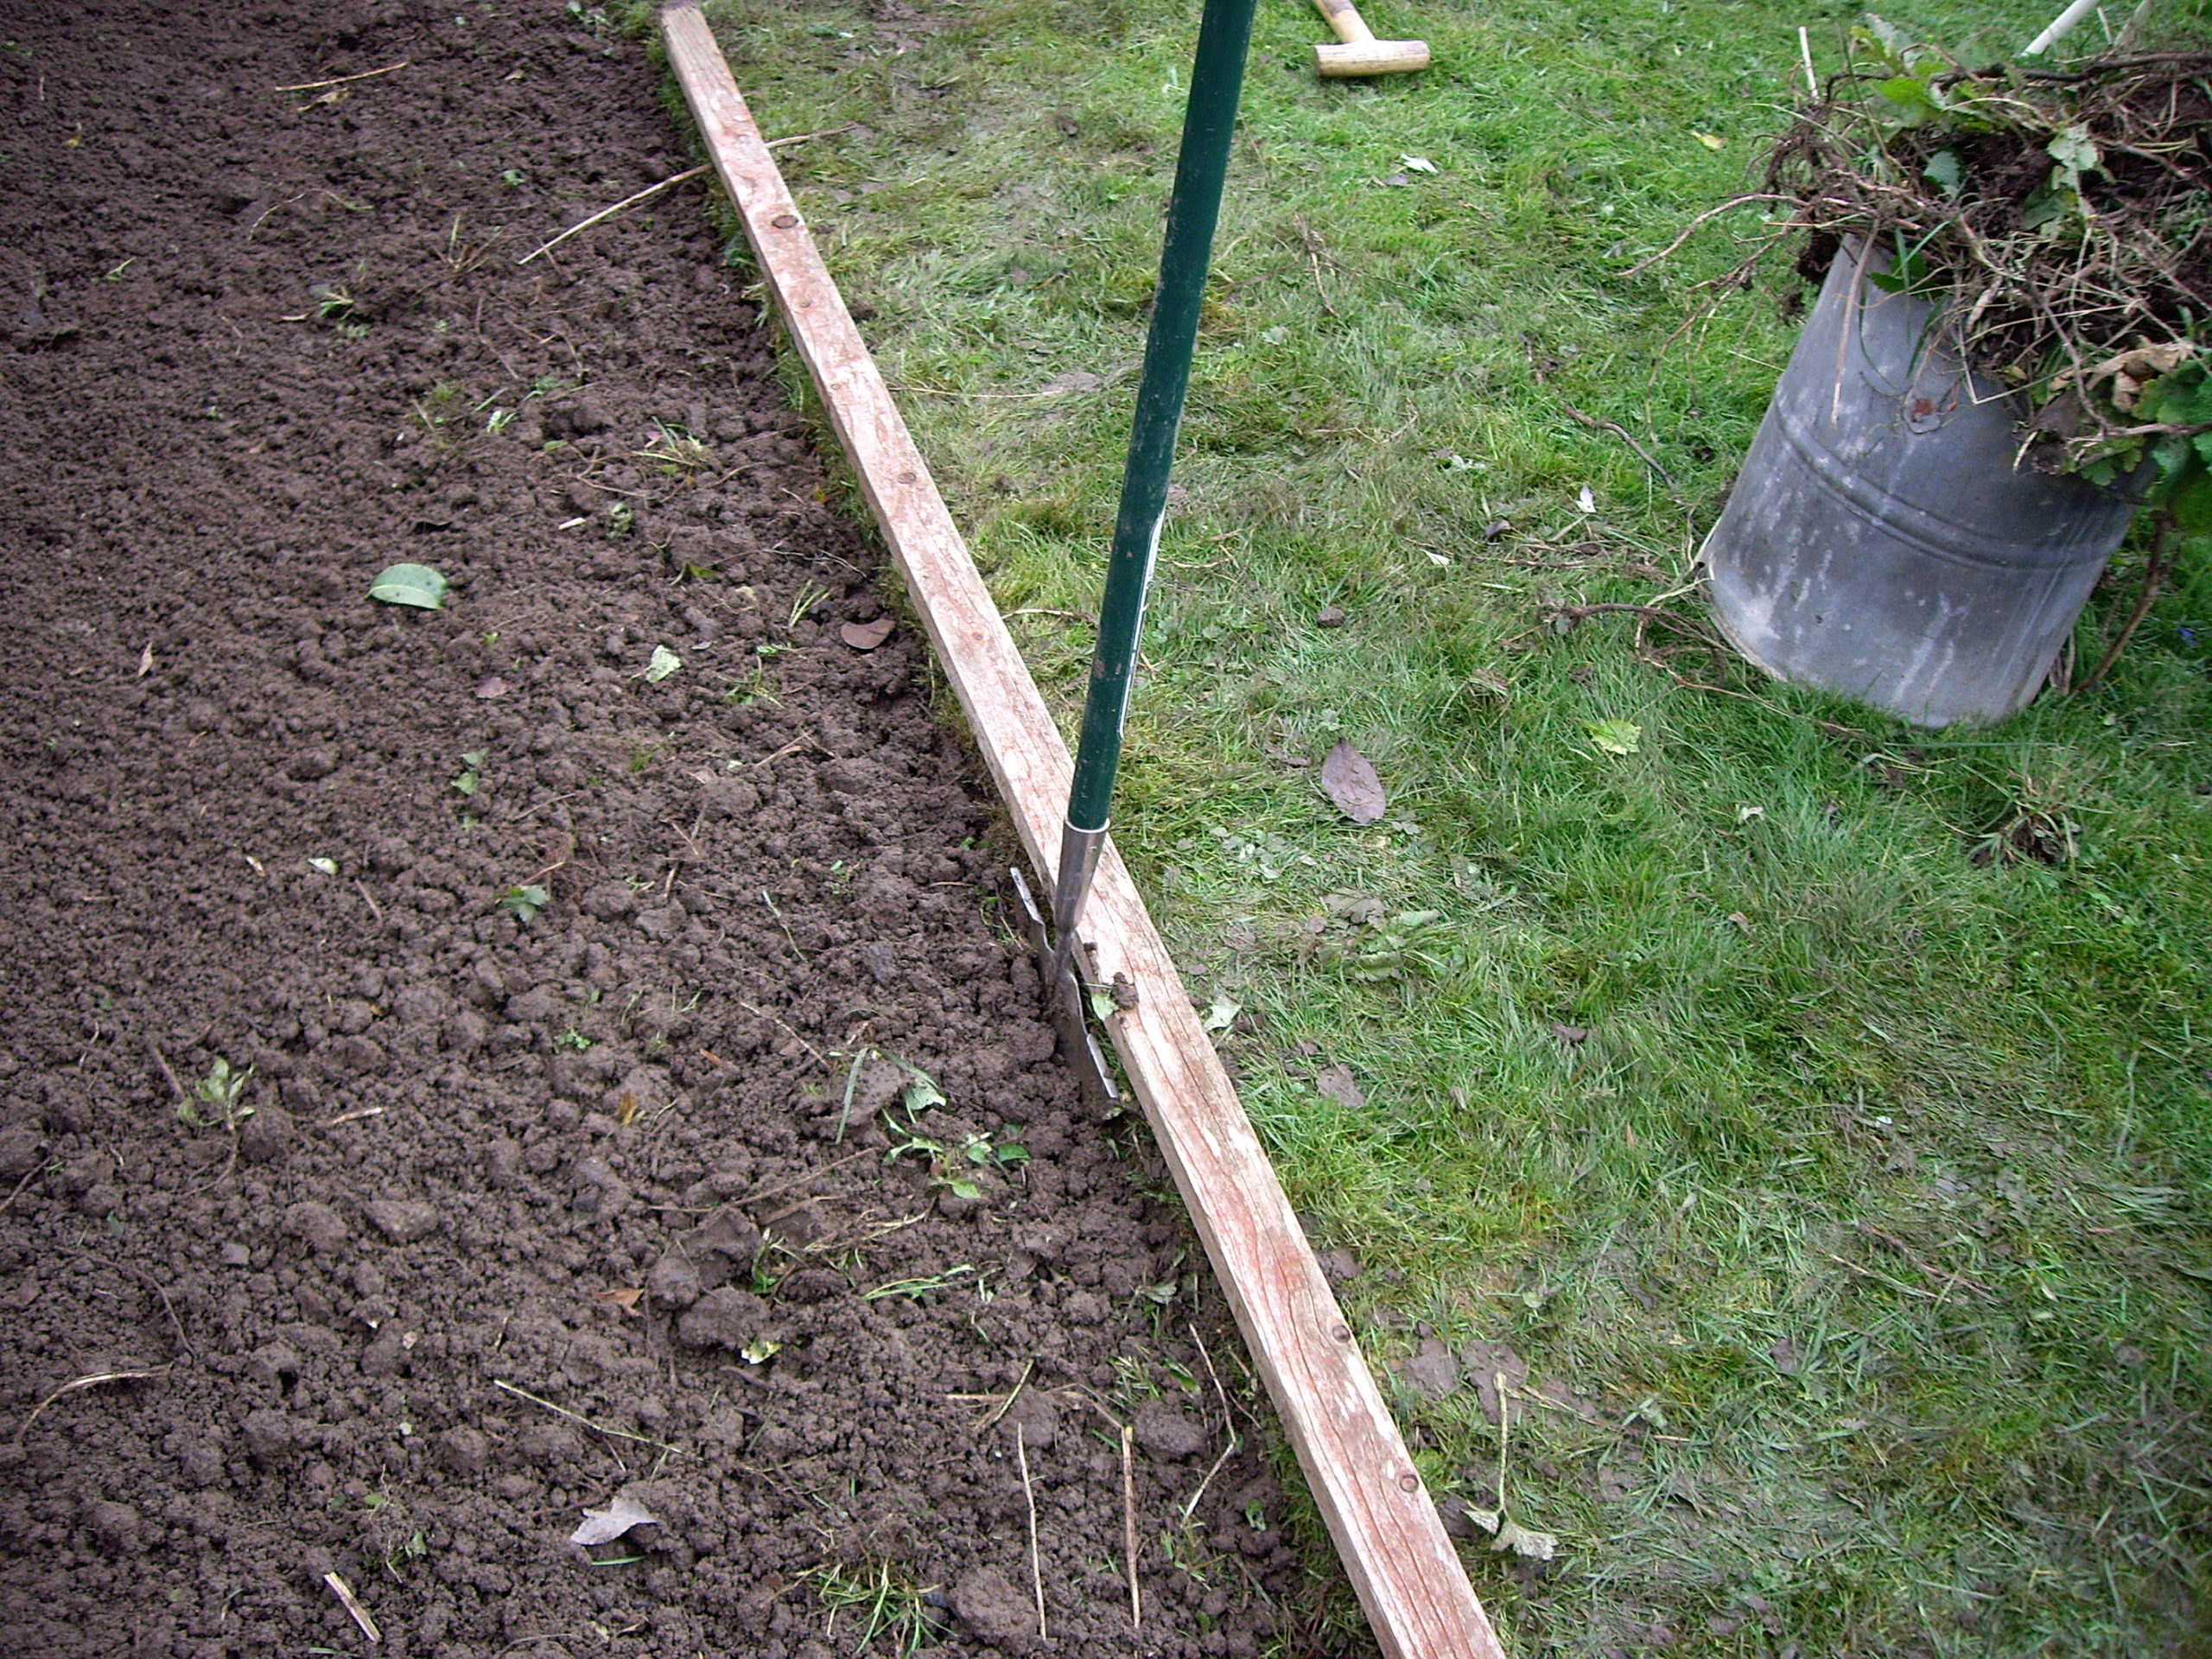 A half moon edger being used for lawn edging in winter